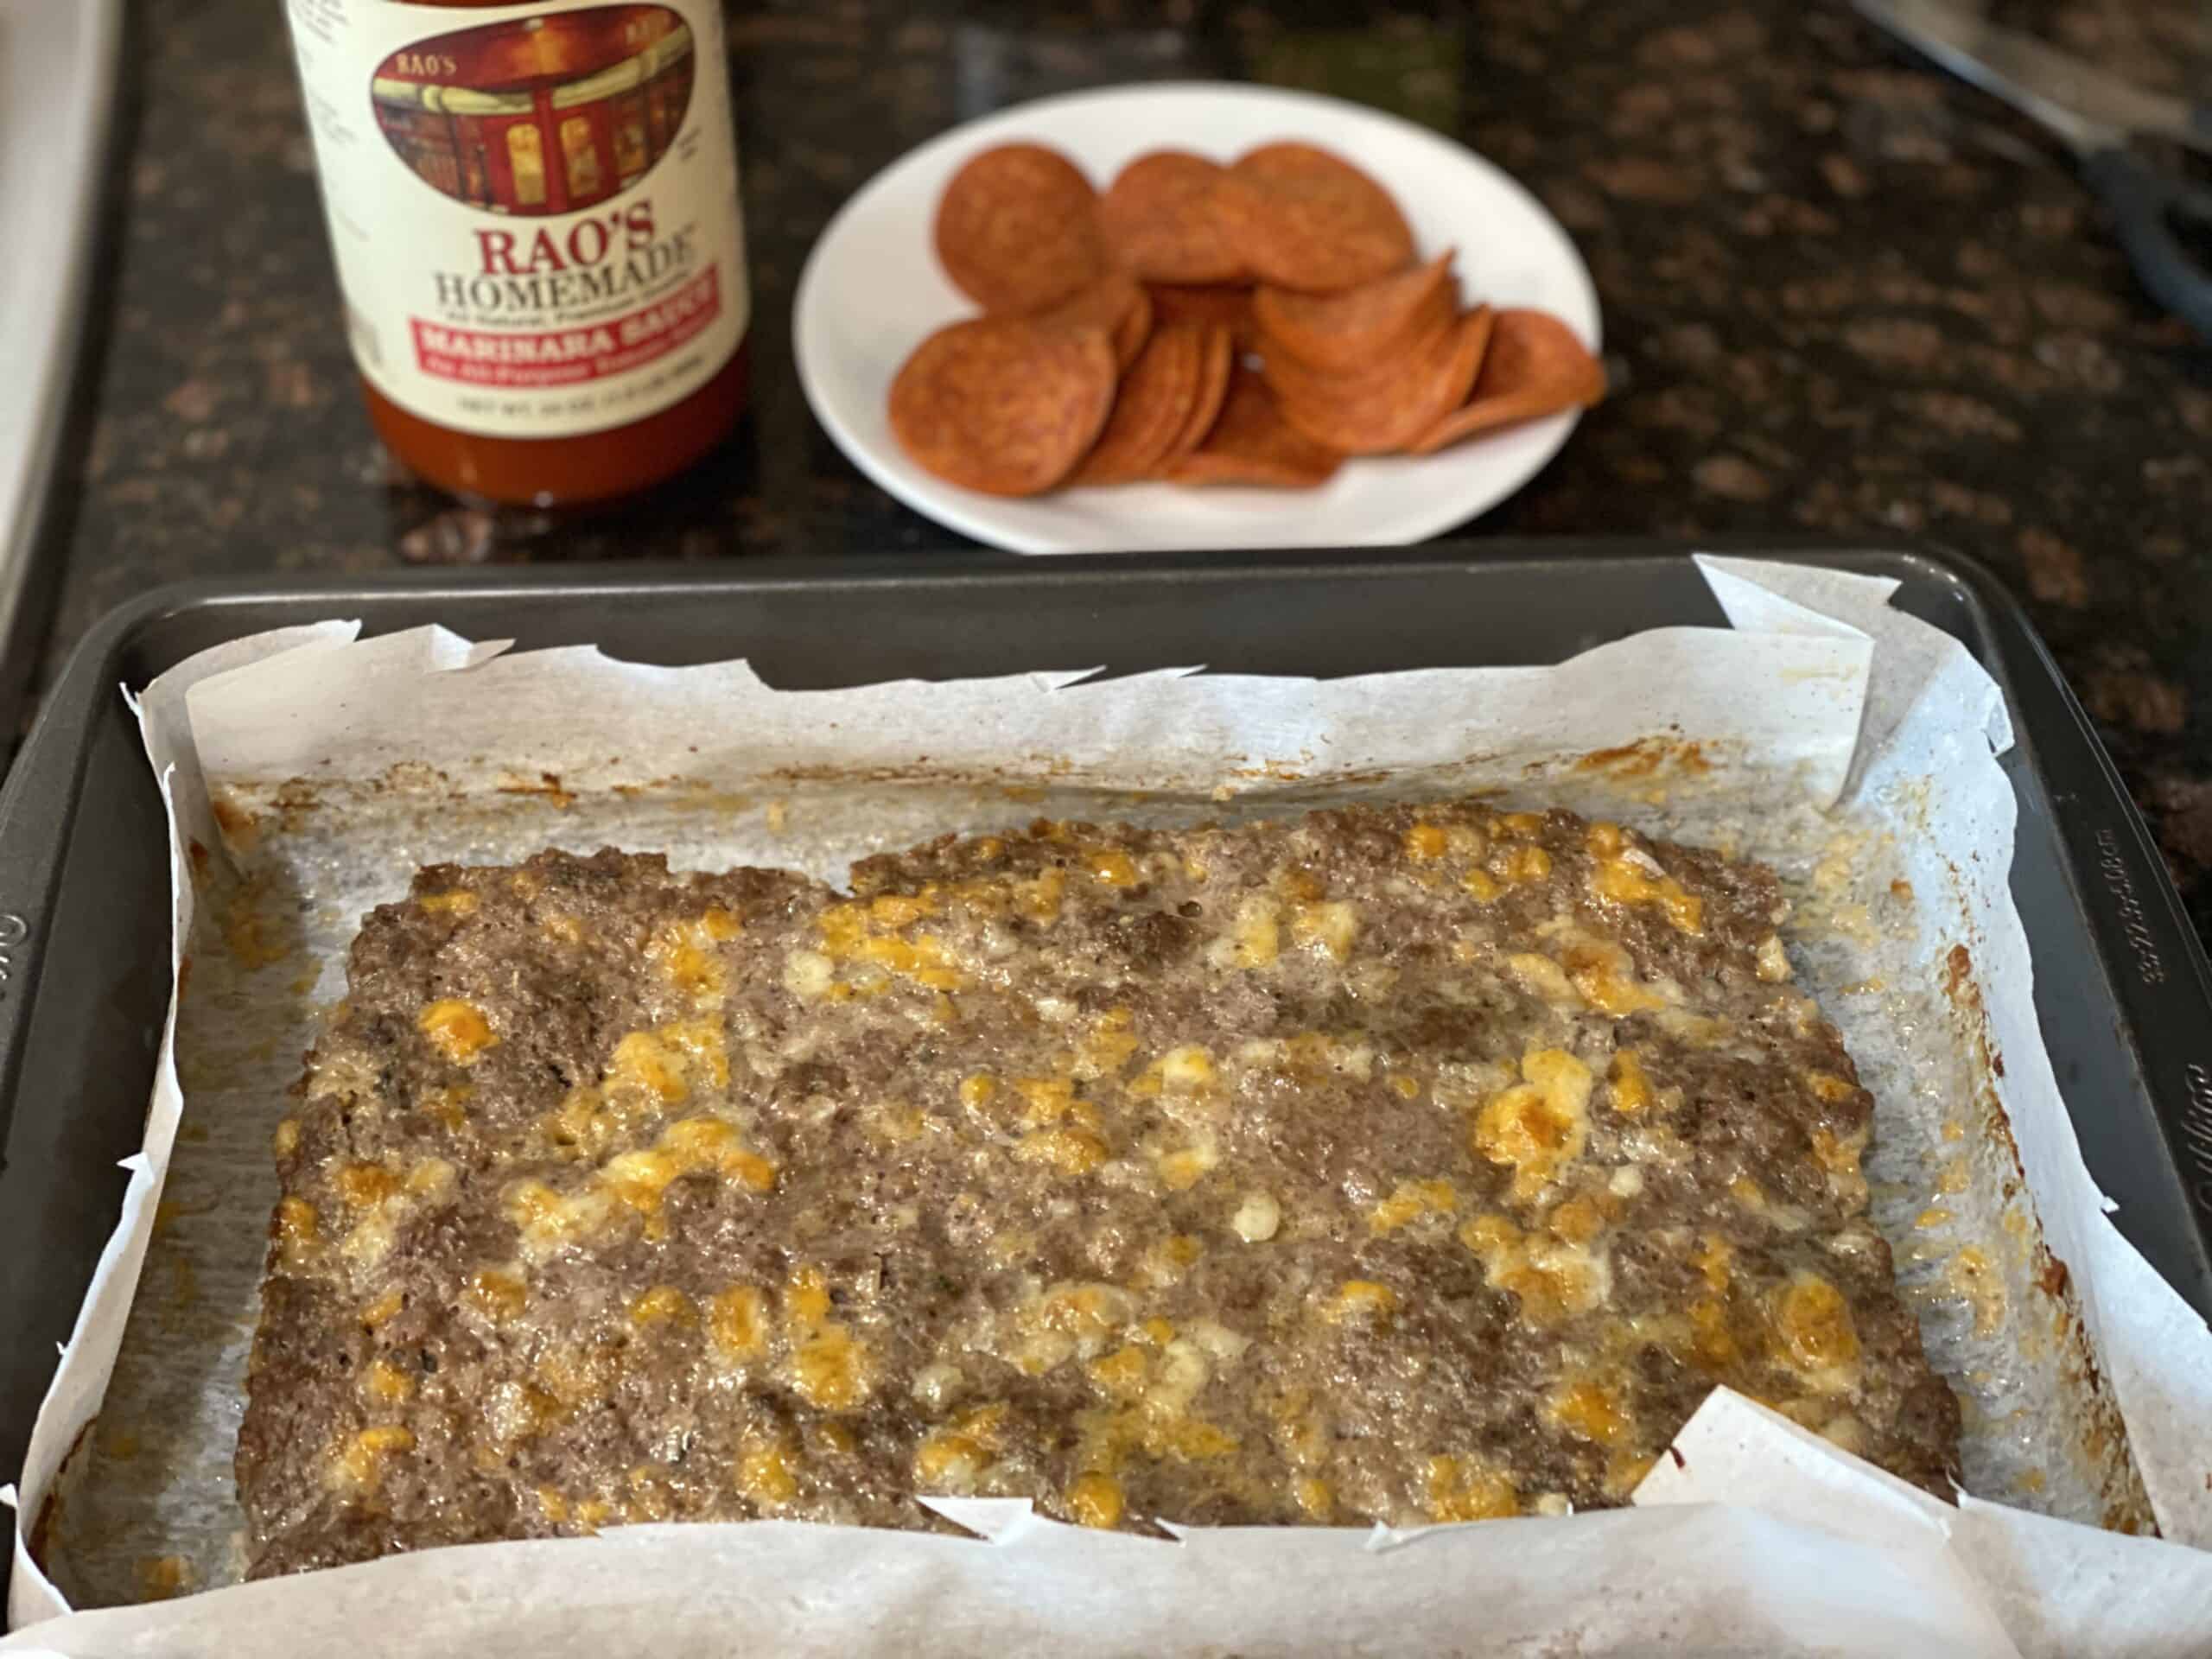 Beef and pork crust spread out on a baking sheet